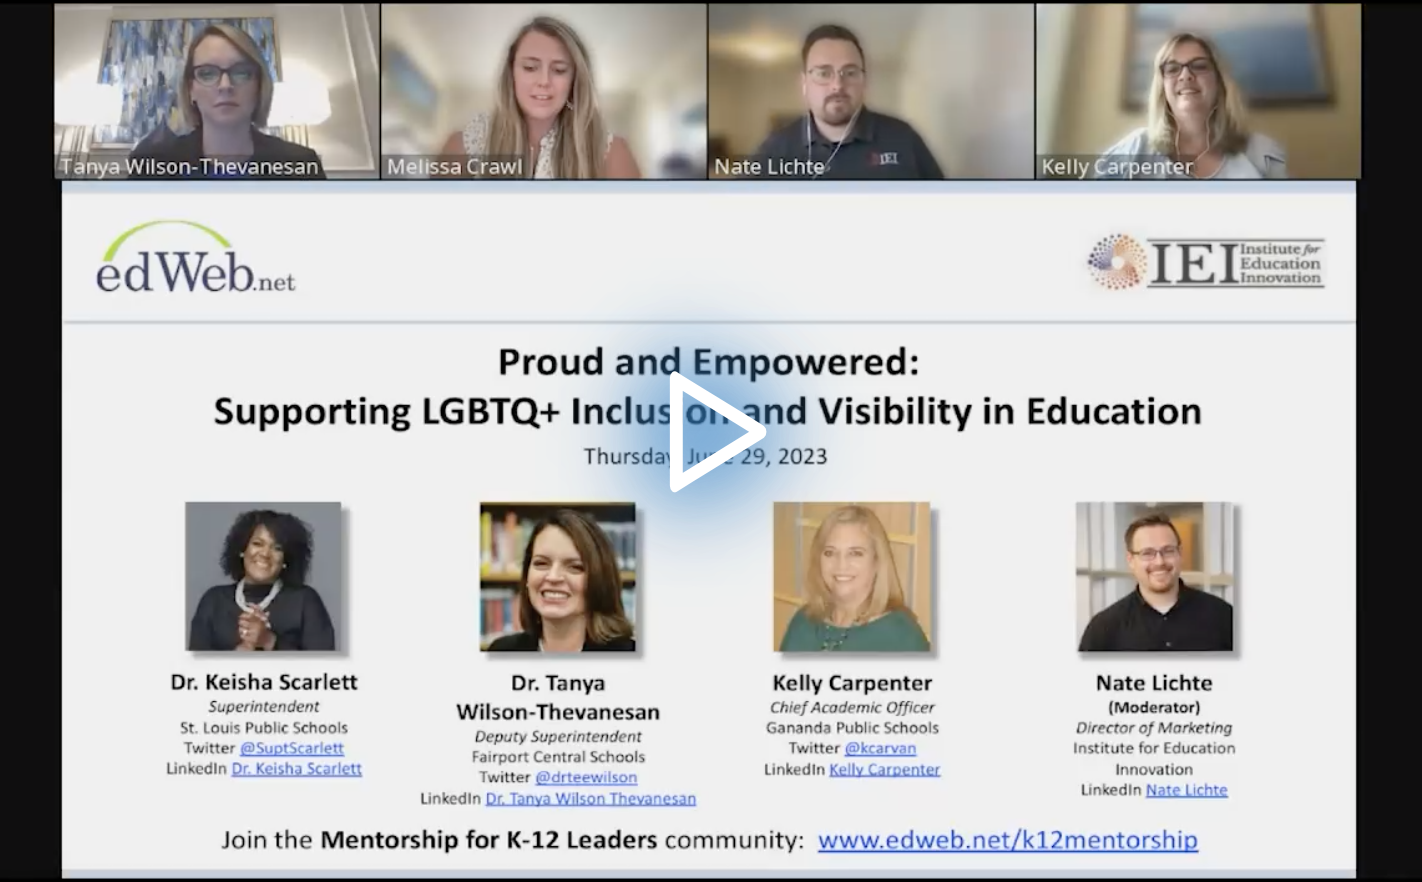 Proud and Empowered: Supporting LGBTQ+ Inclusion and Visibility in Education edLeader Panel recording screenshot